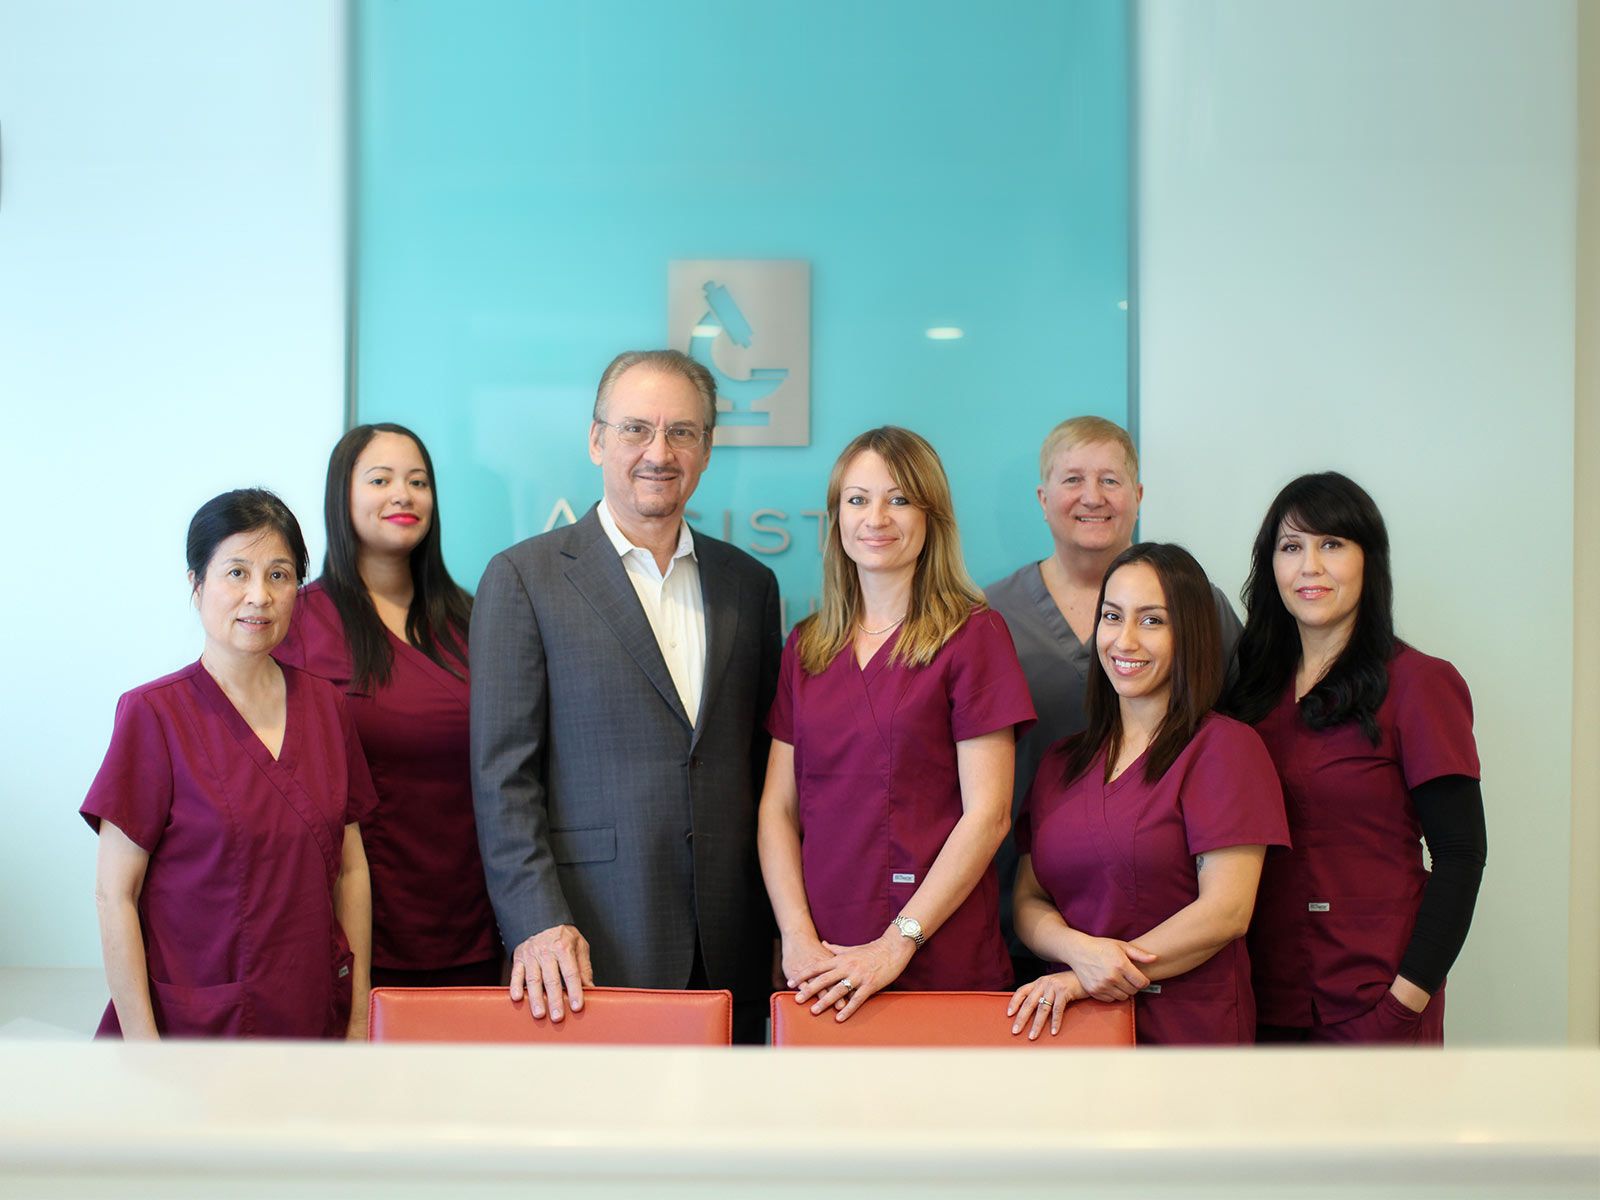 The Center for Fertility & Gynecology Photo